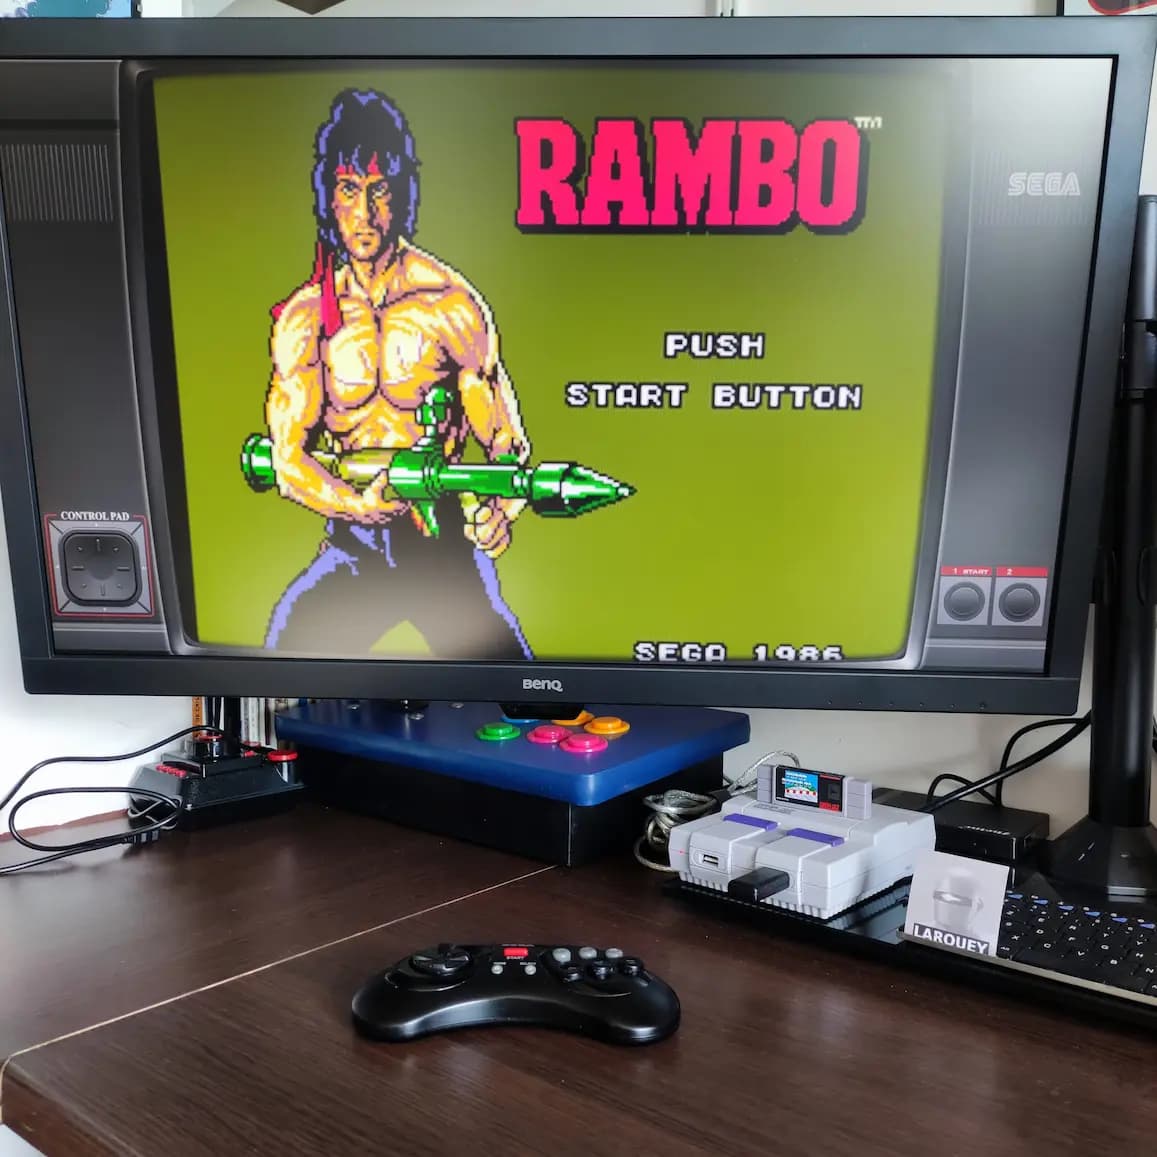 Larquey: Rambo First Blood Part II (Sega Master System Emulated) 16,000 points on 2022-07-28 10:58:24